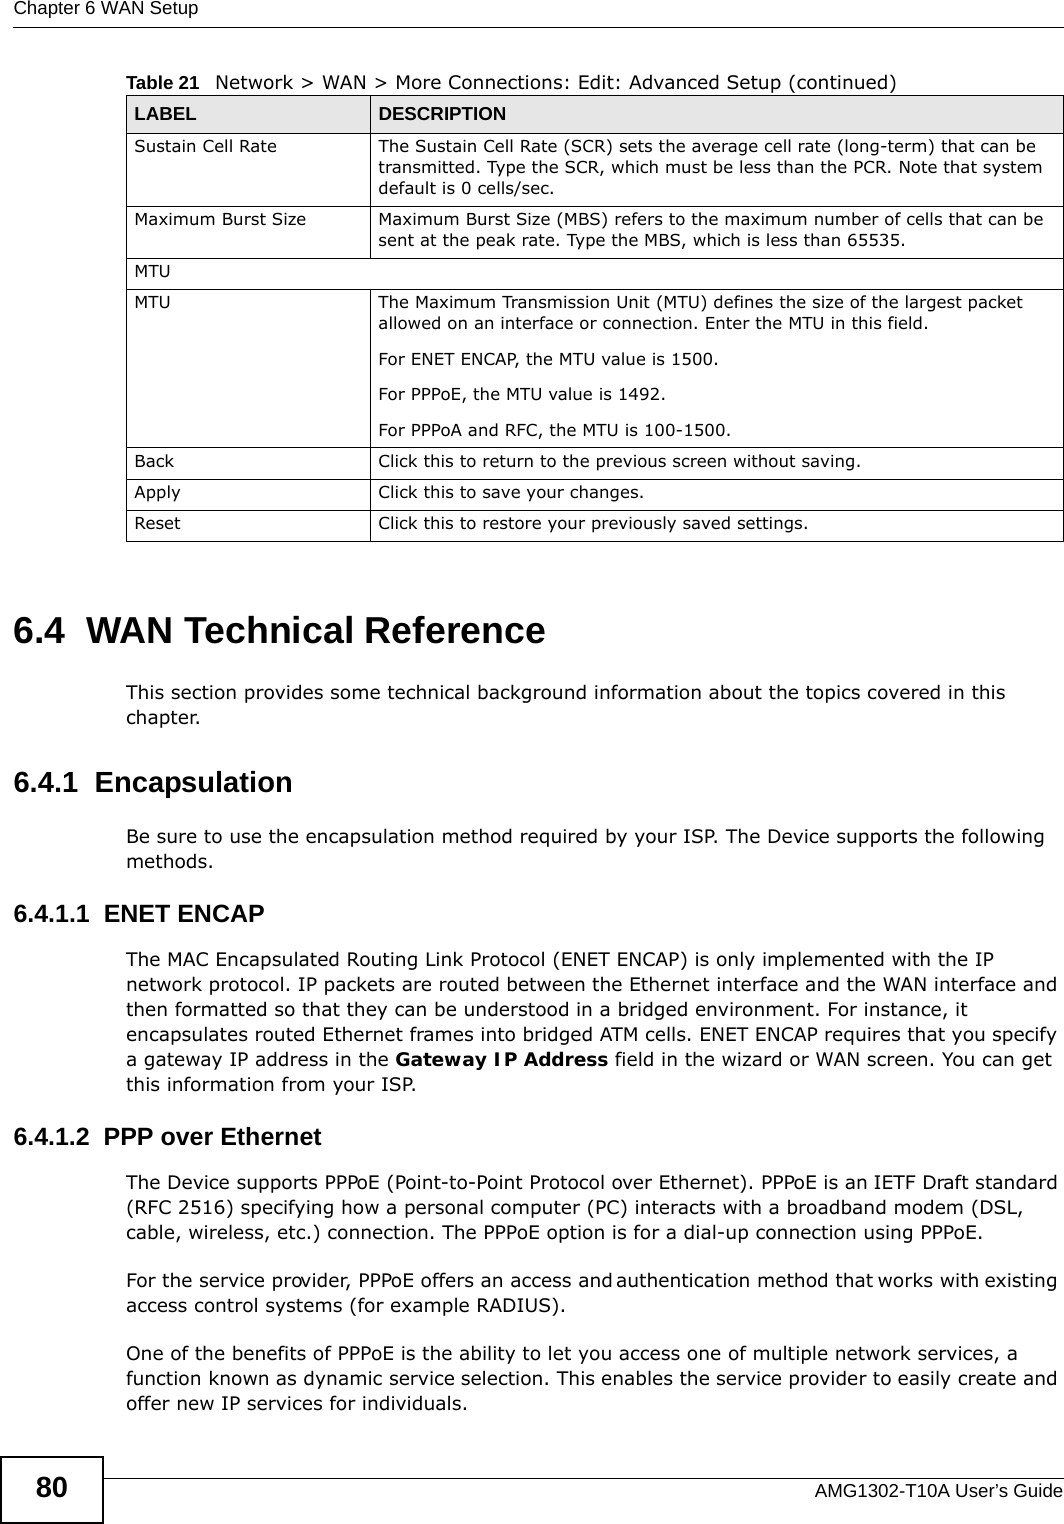 Chapter 6 WAN SetupAMG1302-T10A User’s Guide806.4  WAN Technical ReferenceThis section provides some technical background information about the topics covered in this chapter.6.4.1  EncapsulationBe sure to use the encapsulation method required by your ISP. The Device supports the following methods.6.4.1.1  ENET ENCAPThe MAC Encapsulated Routing Link Protocol (ENET ENCAP) is only implemented with the IP network protocol. IP packets are routed between the Ethernet interface and the WAN interface and then formatted so that they can be understood in a bridged environment. For instance, it encapsulates routed Ethernet frames into bridged ATM cells. ENET ENCAP requires that you specify a gateway IP address in the Gateway IP Address field in the wizard or WAN screen. You can get this information from your ISP.6.4.1.2  PPP over EthernetThe Device supports PPPoE (Point-to-Point Protocol over Ethernet). PPPoE is an IETF Draft standard (RFC 2516) specifying how a personal computer (PC) interacts with a broadband modem (DSL, cable, wireless, etc.) connection. The PPPoE option is for a dial-up connection using PPPoE.For the service provider, PPPoE offers an access and authentication method that works with existing access control systems (for example RADIUS).One of the benefits of PPPoE is the ability to let you access one of multiple network services, a function known as dynamic service selection. This enables the service provider to easily create and offer new IP services for individuals.Sustain Cell Rate The Sustain Cell Rate (SCR) sets the average cell rate (long-term) that can be transmitted. Type the SCR, which must be less than the PCR. Note that system default is 0 cells/sec. Maximum Burst Size Maximum Burst Size (MBS) refers to the maximum number of cells that can be sent at the peak rate. Type the MBS, which is less than 65535. MTUMTU The Maximum Transmission Unit (MTU) defines the size of the largest packet allowed on an interface or connection. Enter the MTU in this field.For ENET ENCAP, the MTU value is 1500.For PPPoE, the MTU value is 1492.For PPPoA and RFC, the MTU is 100-1500.Back Click this to return to the previous screen without saving.Apply Click this to save your changes. Reset Click this to restore your previously saved settings.Table 21   Network &gt; WAN &gt; More Connections: Edit: Advanced Setup (continued)LABEL DESCRIPTION